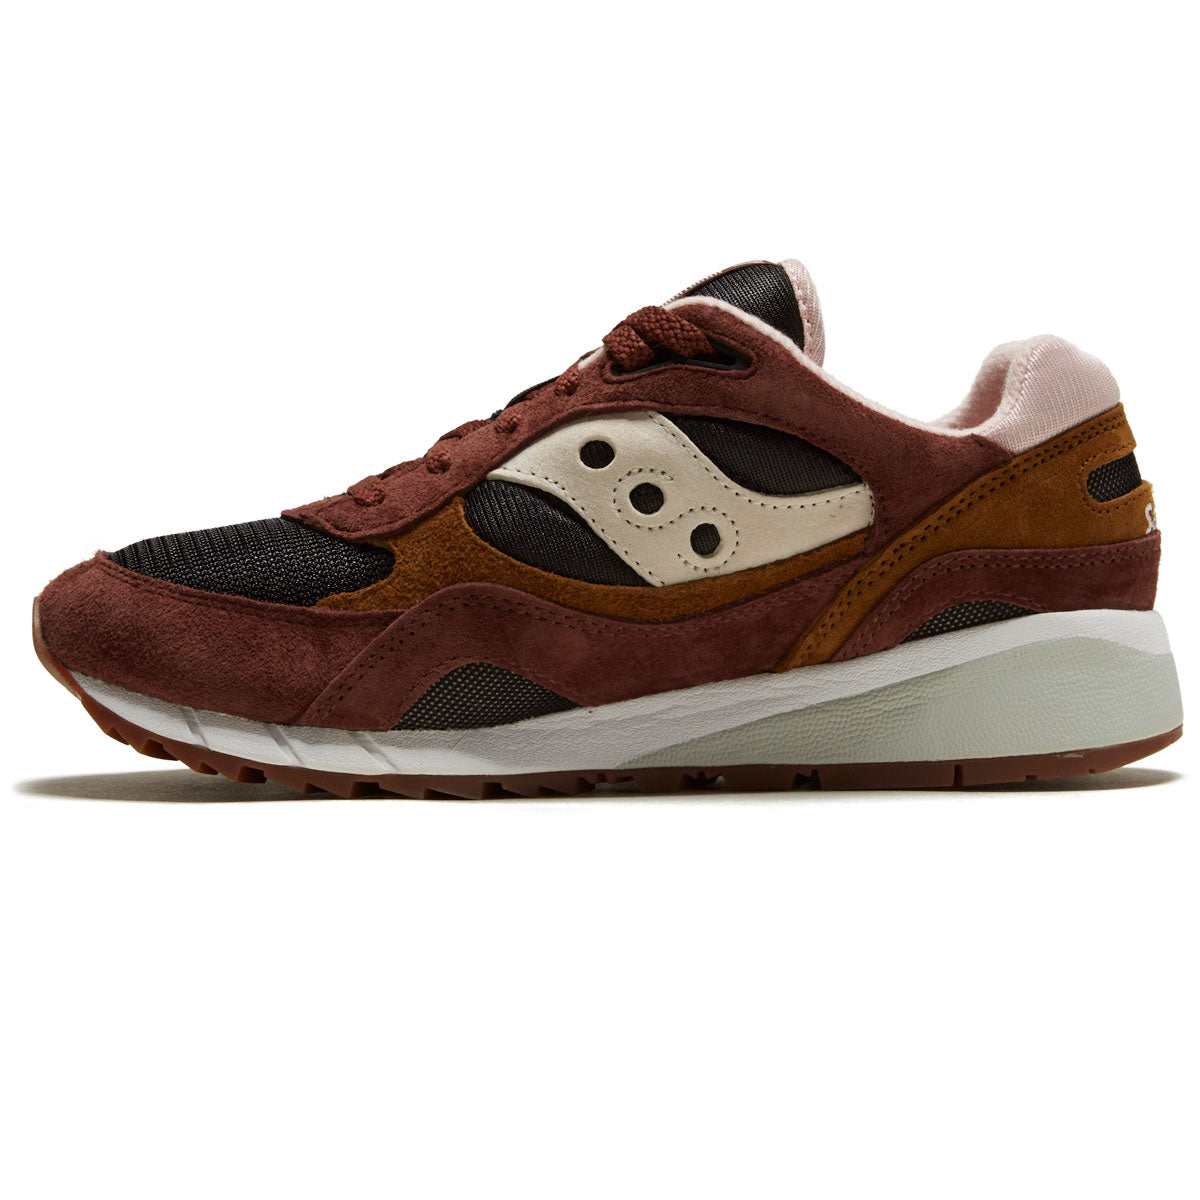 Saucony Shadow 6000 Shoes - Brown/Black image 2